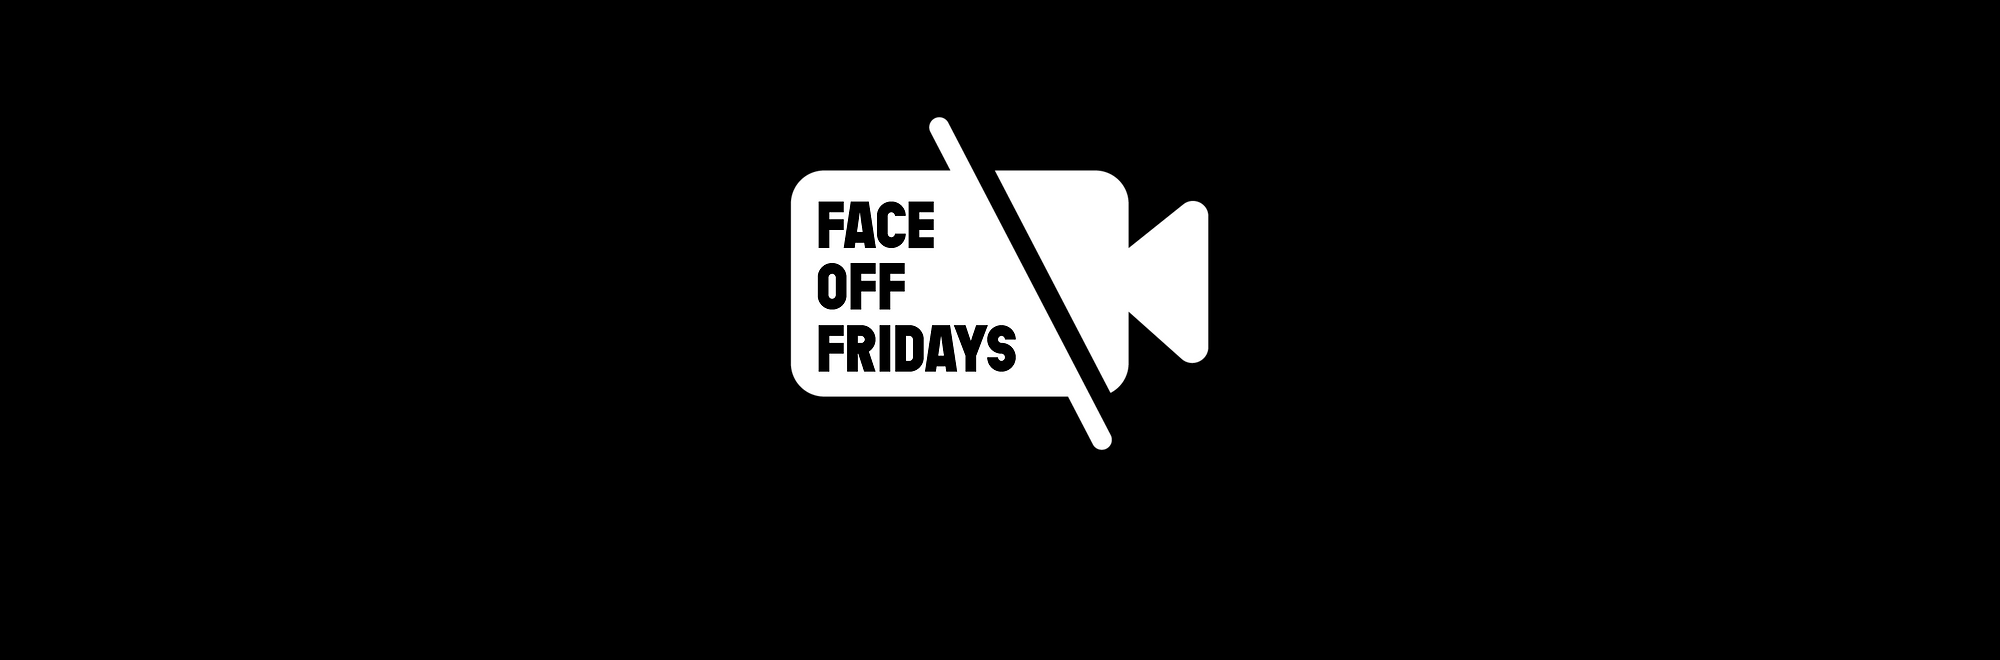 Face Off Fridays: Turn off your camera on video calls and help save the planet!